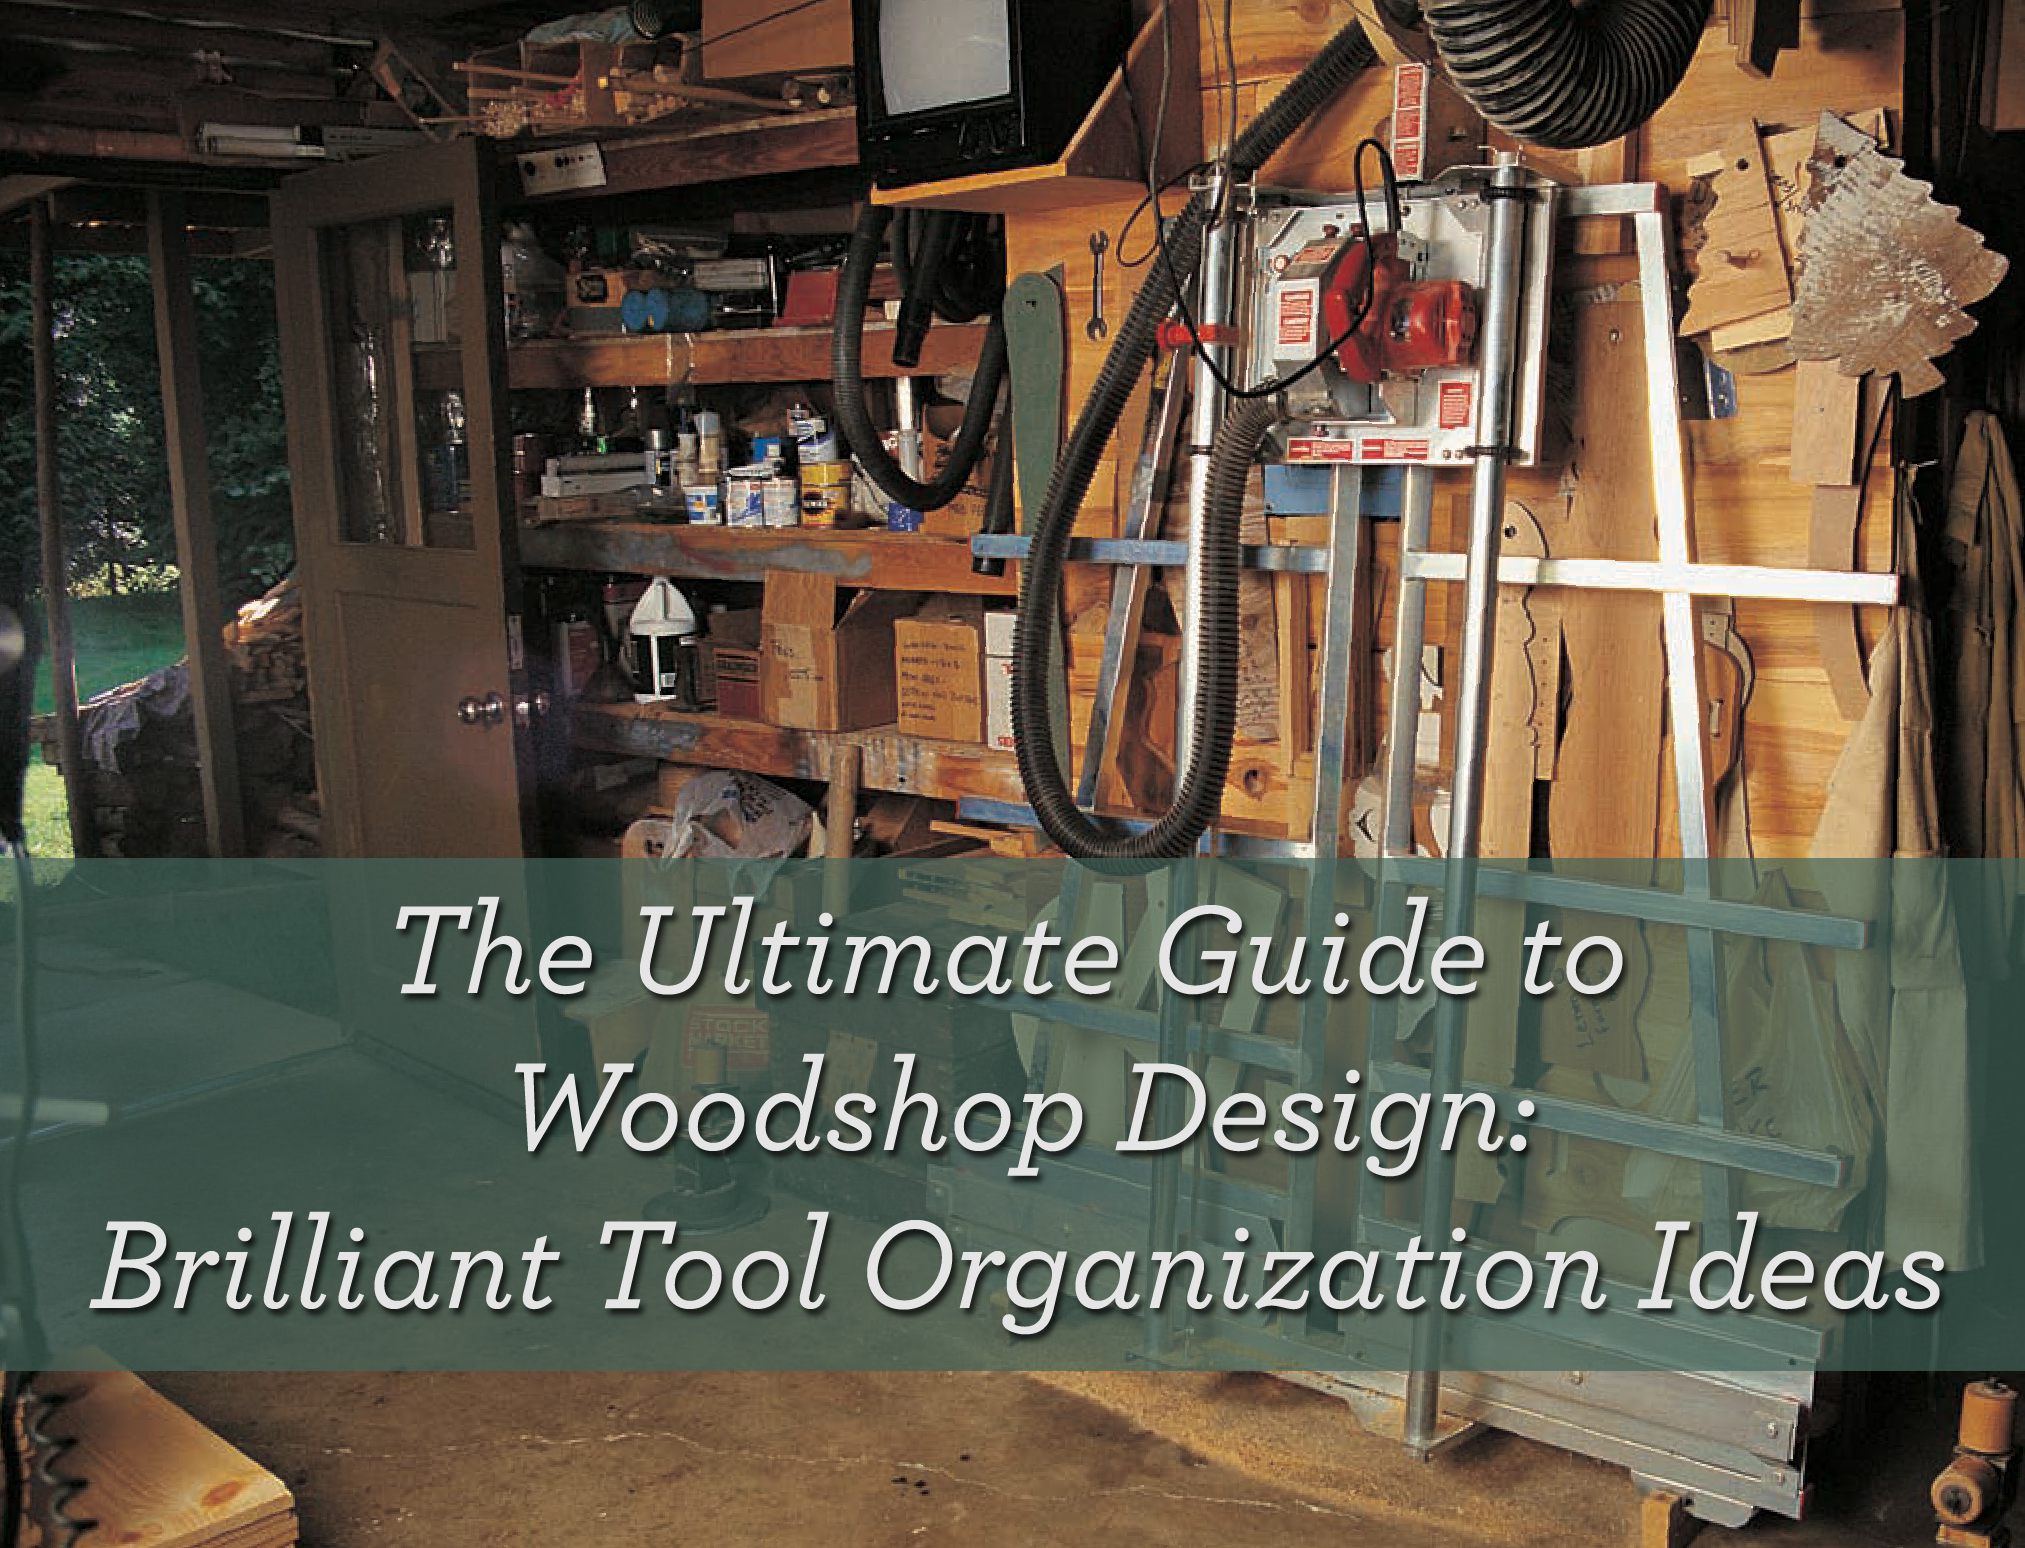 Learn the art of woodshop design with this free tutorial which includes brilliant tool organization ideas!